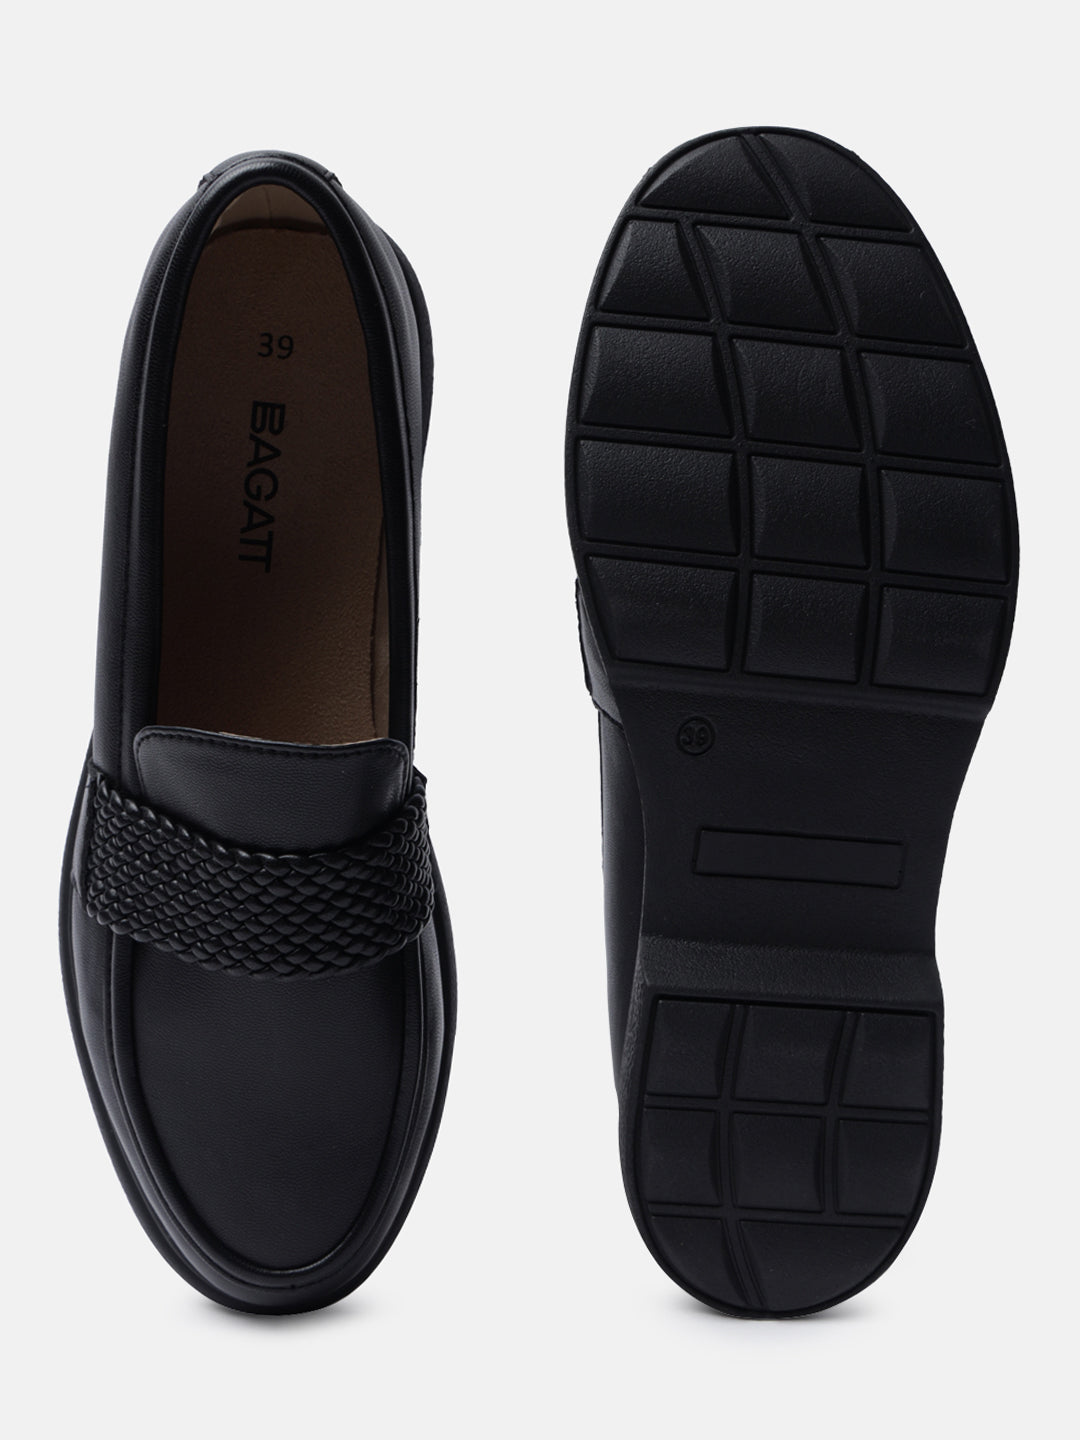 Genelle Black Casual Loafers